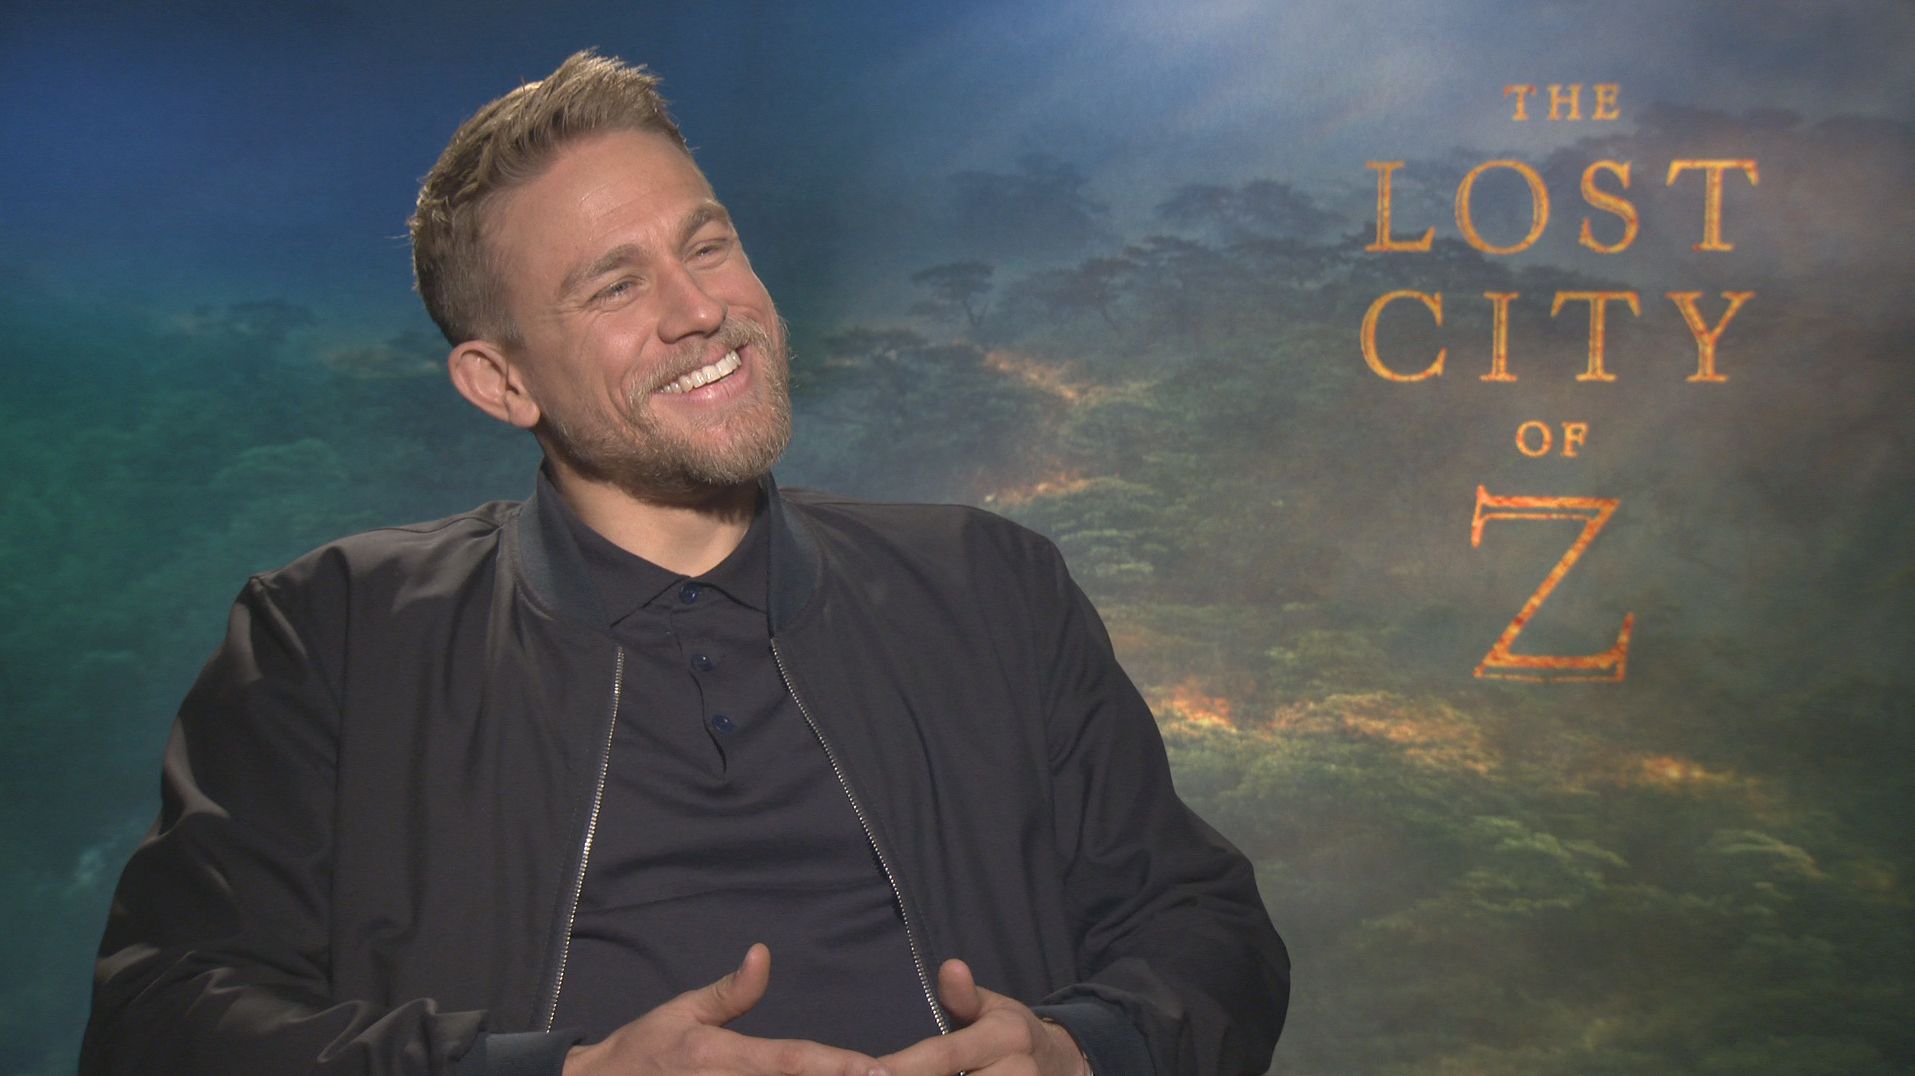 Charlie Hunnam on ‘The Lost City of Z’ and the Crazy Production | Collider1915 x 1076